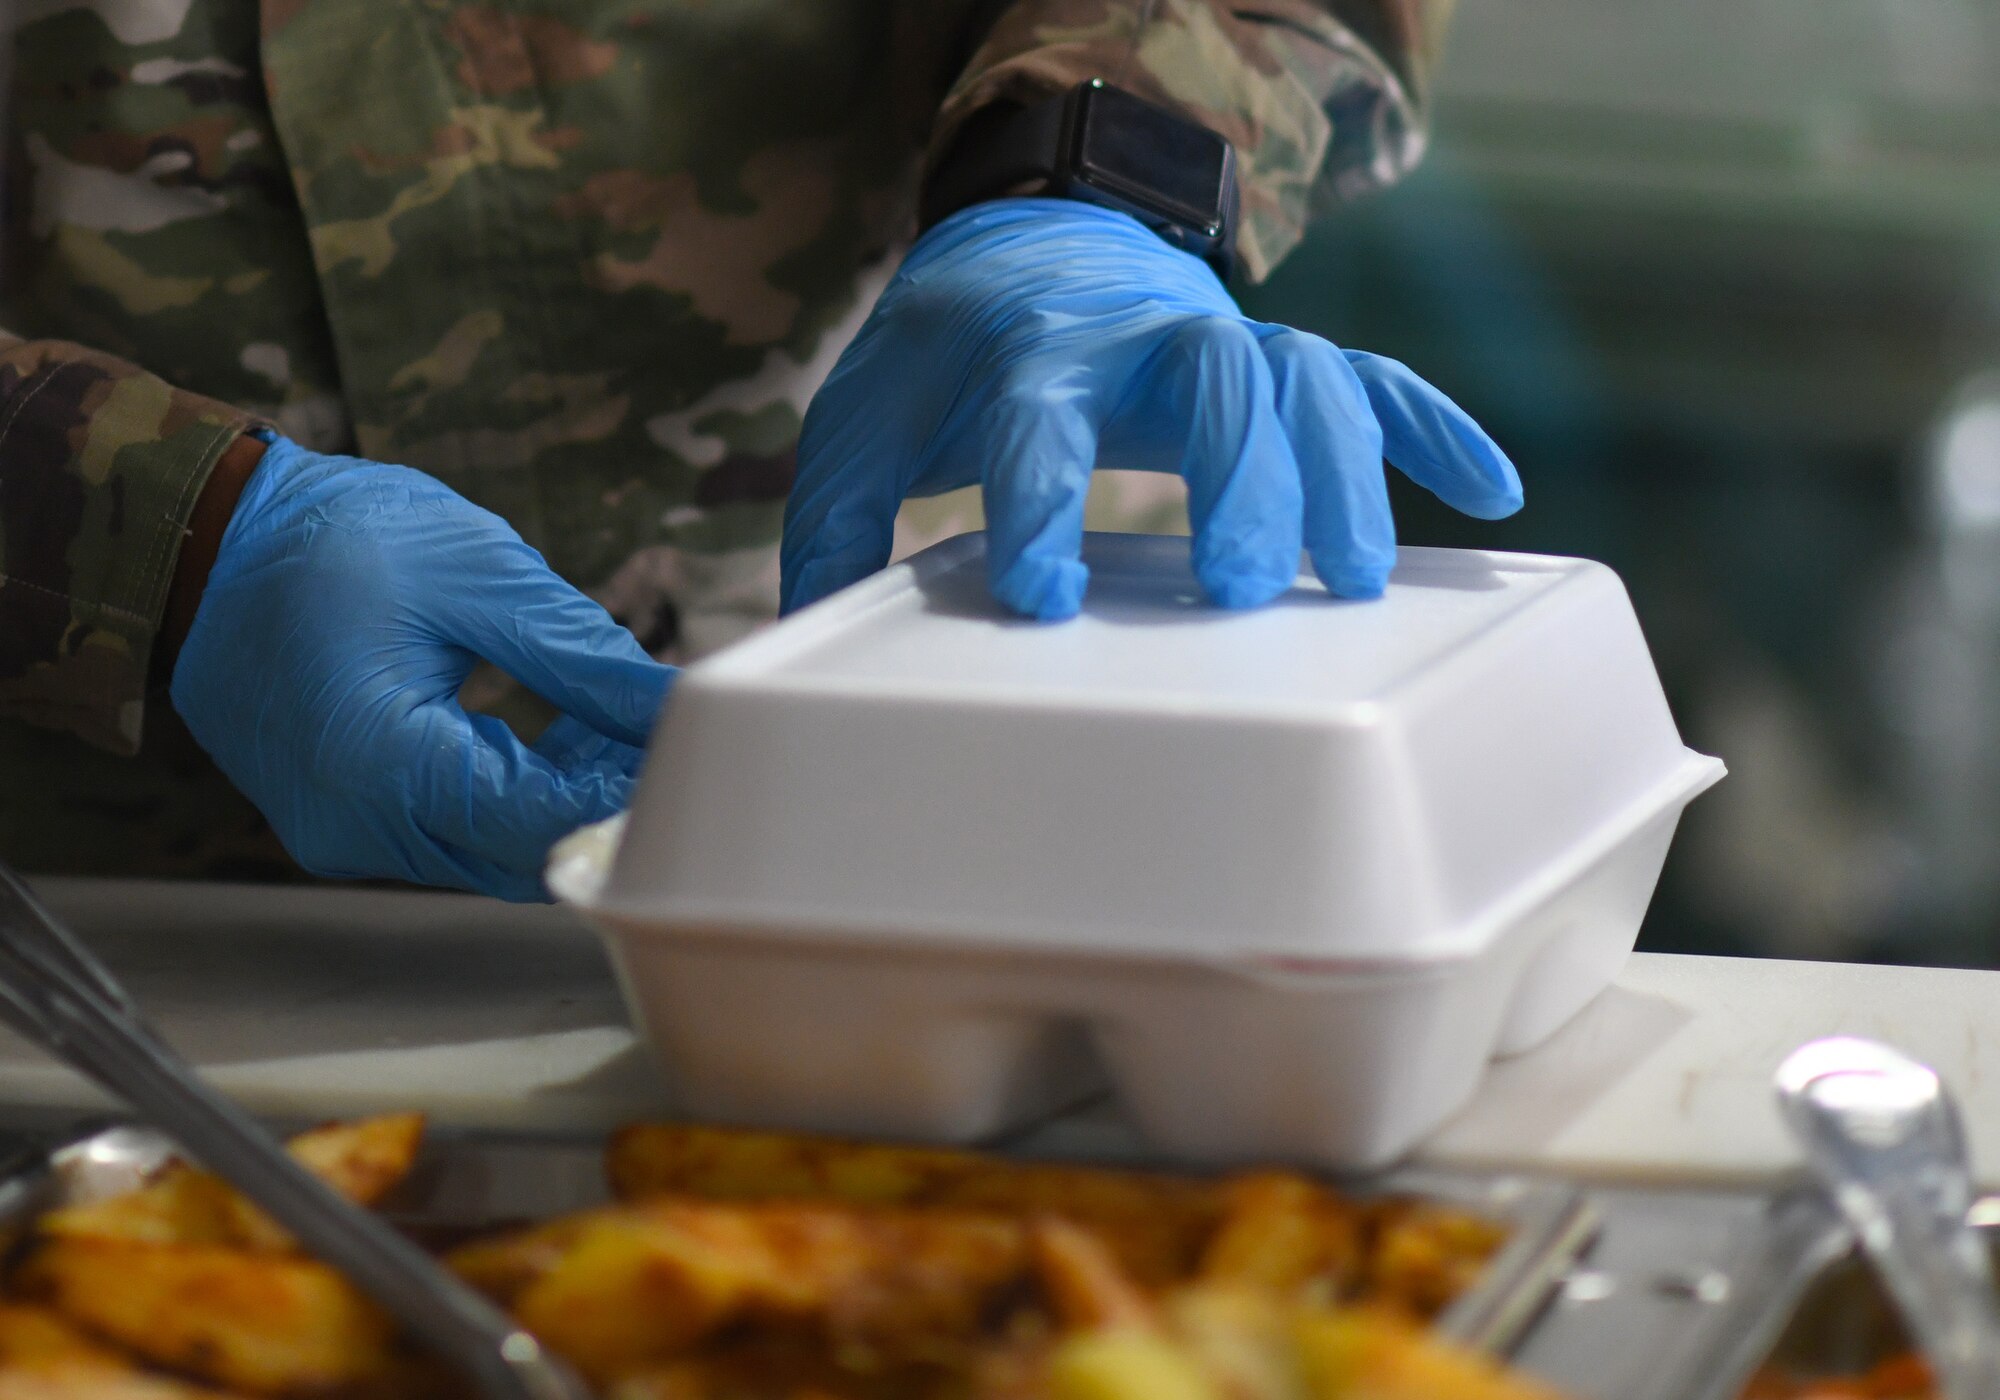 A member of the 776th Expeditionary Air Base Squadron Services team serves food to dining facility patrons at Chabelley Airfield, Djibouti, Nov. 13, 2109. The services Airmen receive, inspect, prepare and serve roughly 800 meals each day to Airmen, Soldiers and contractors fulfilling their duties on the airfield. (U.S. Air Force photo by Staff Sgt. Alex Fox Echols III)